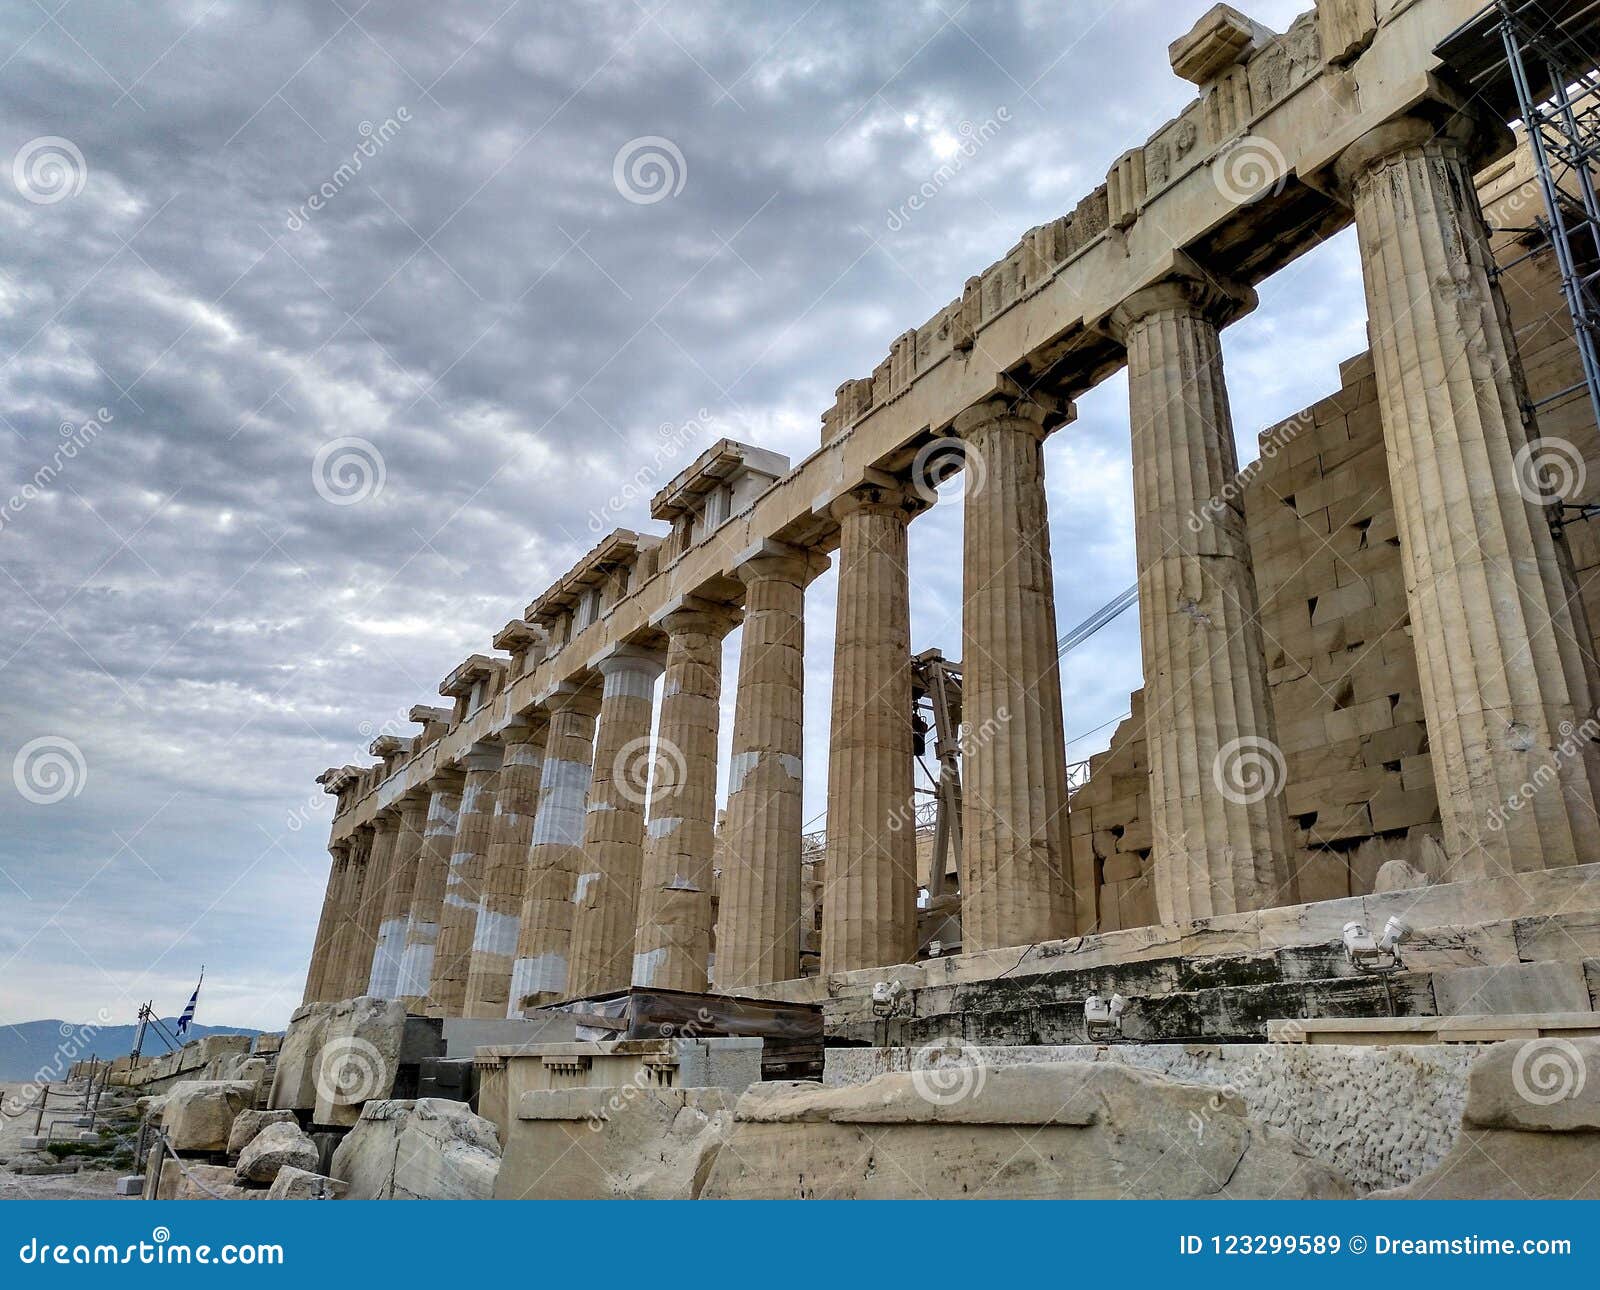 akropolis in the clouds